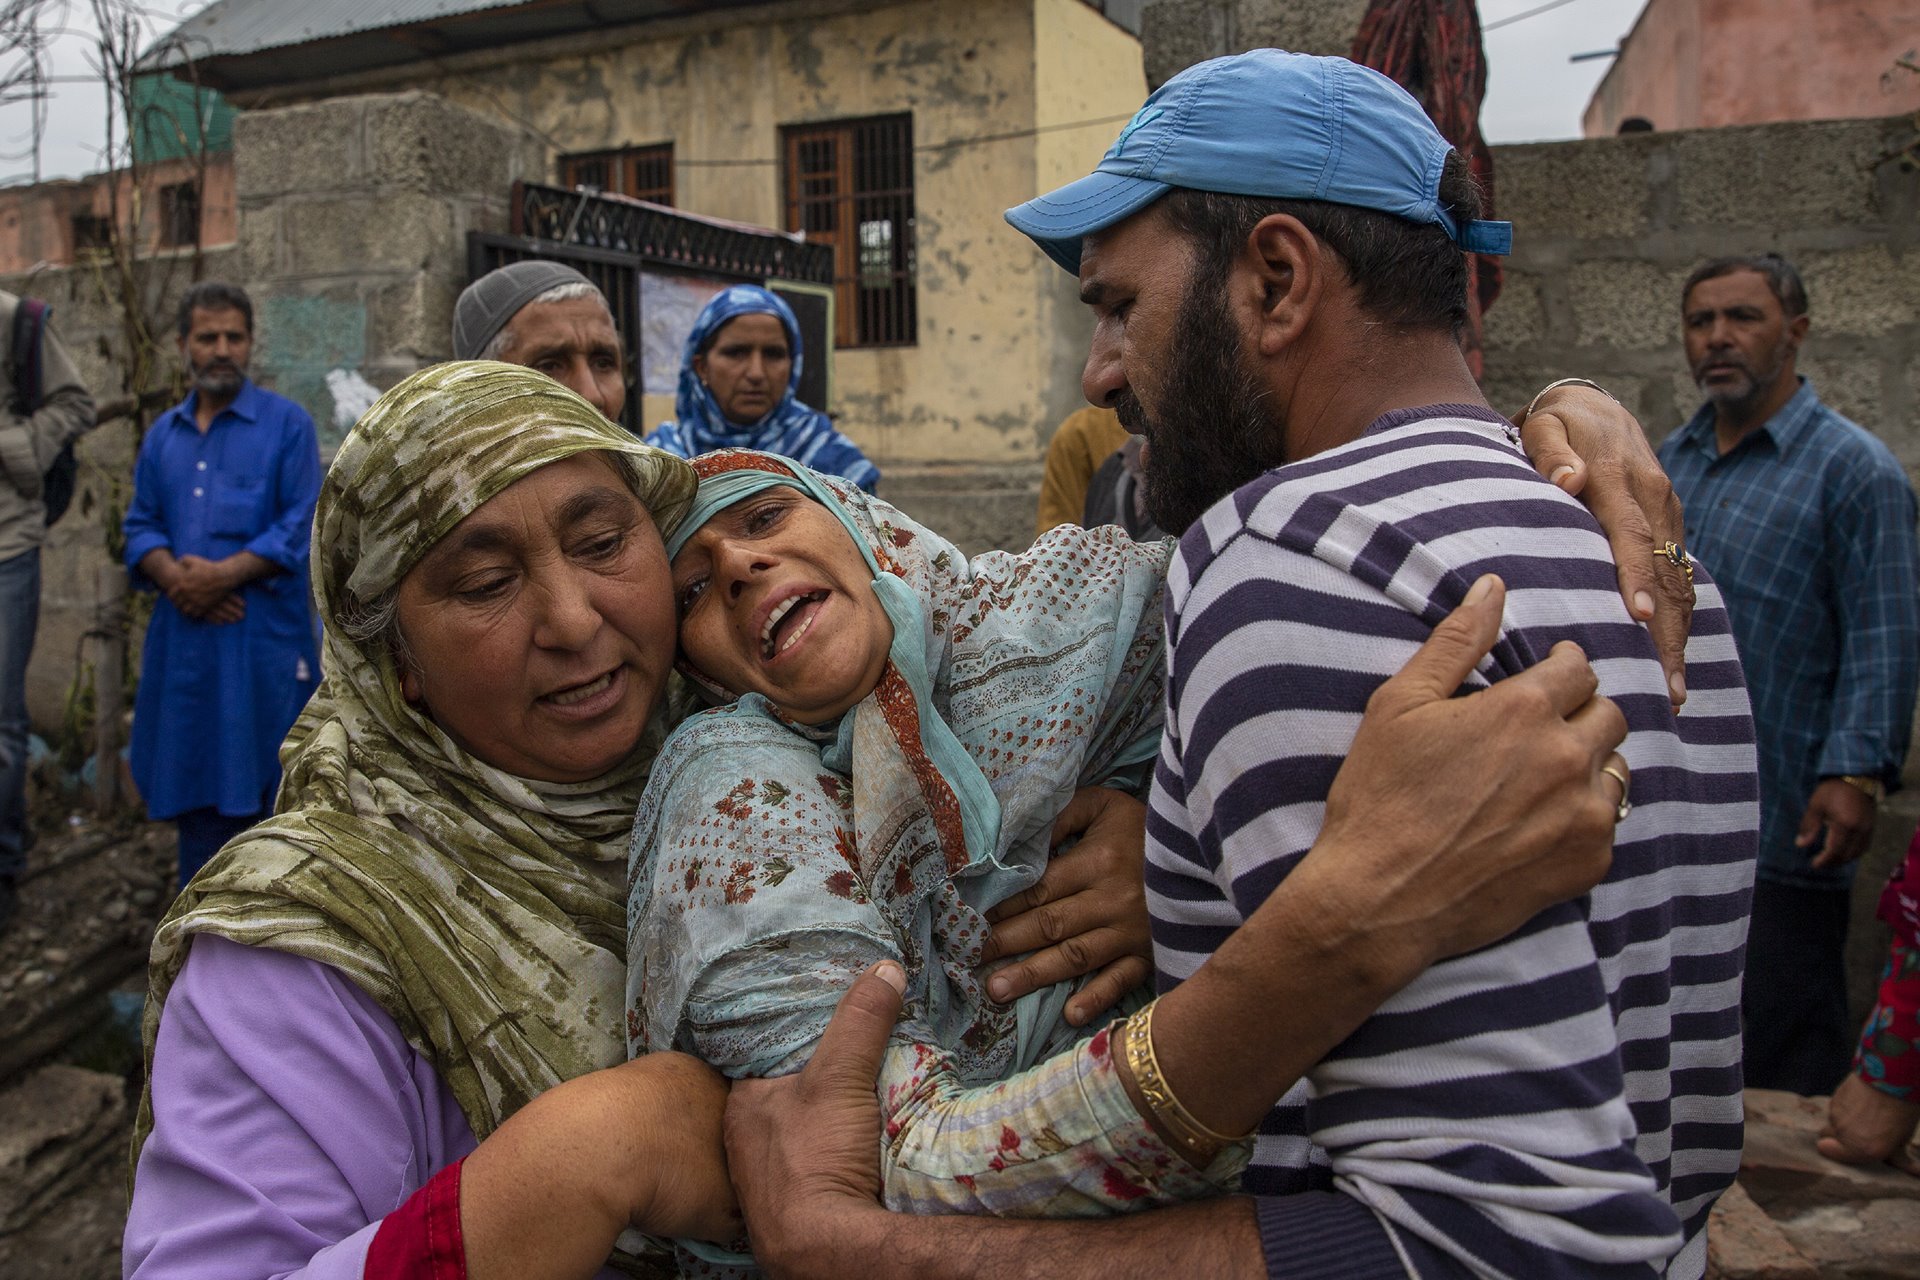 A woman cries beside her home, which was damaged in a gunfight after suspected militants took refuge there, in Pulwama, south of Srinagar, in Indian-administered Kashmir. Officials said that three suspected militants were killed in the fight. Two other homes were damaged.